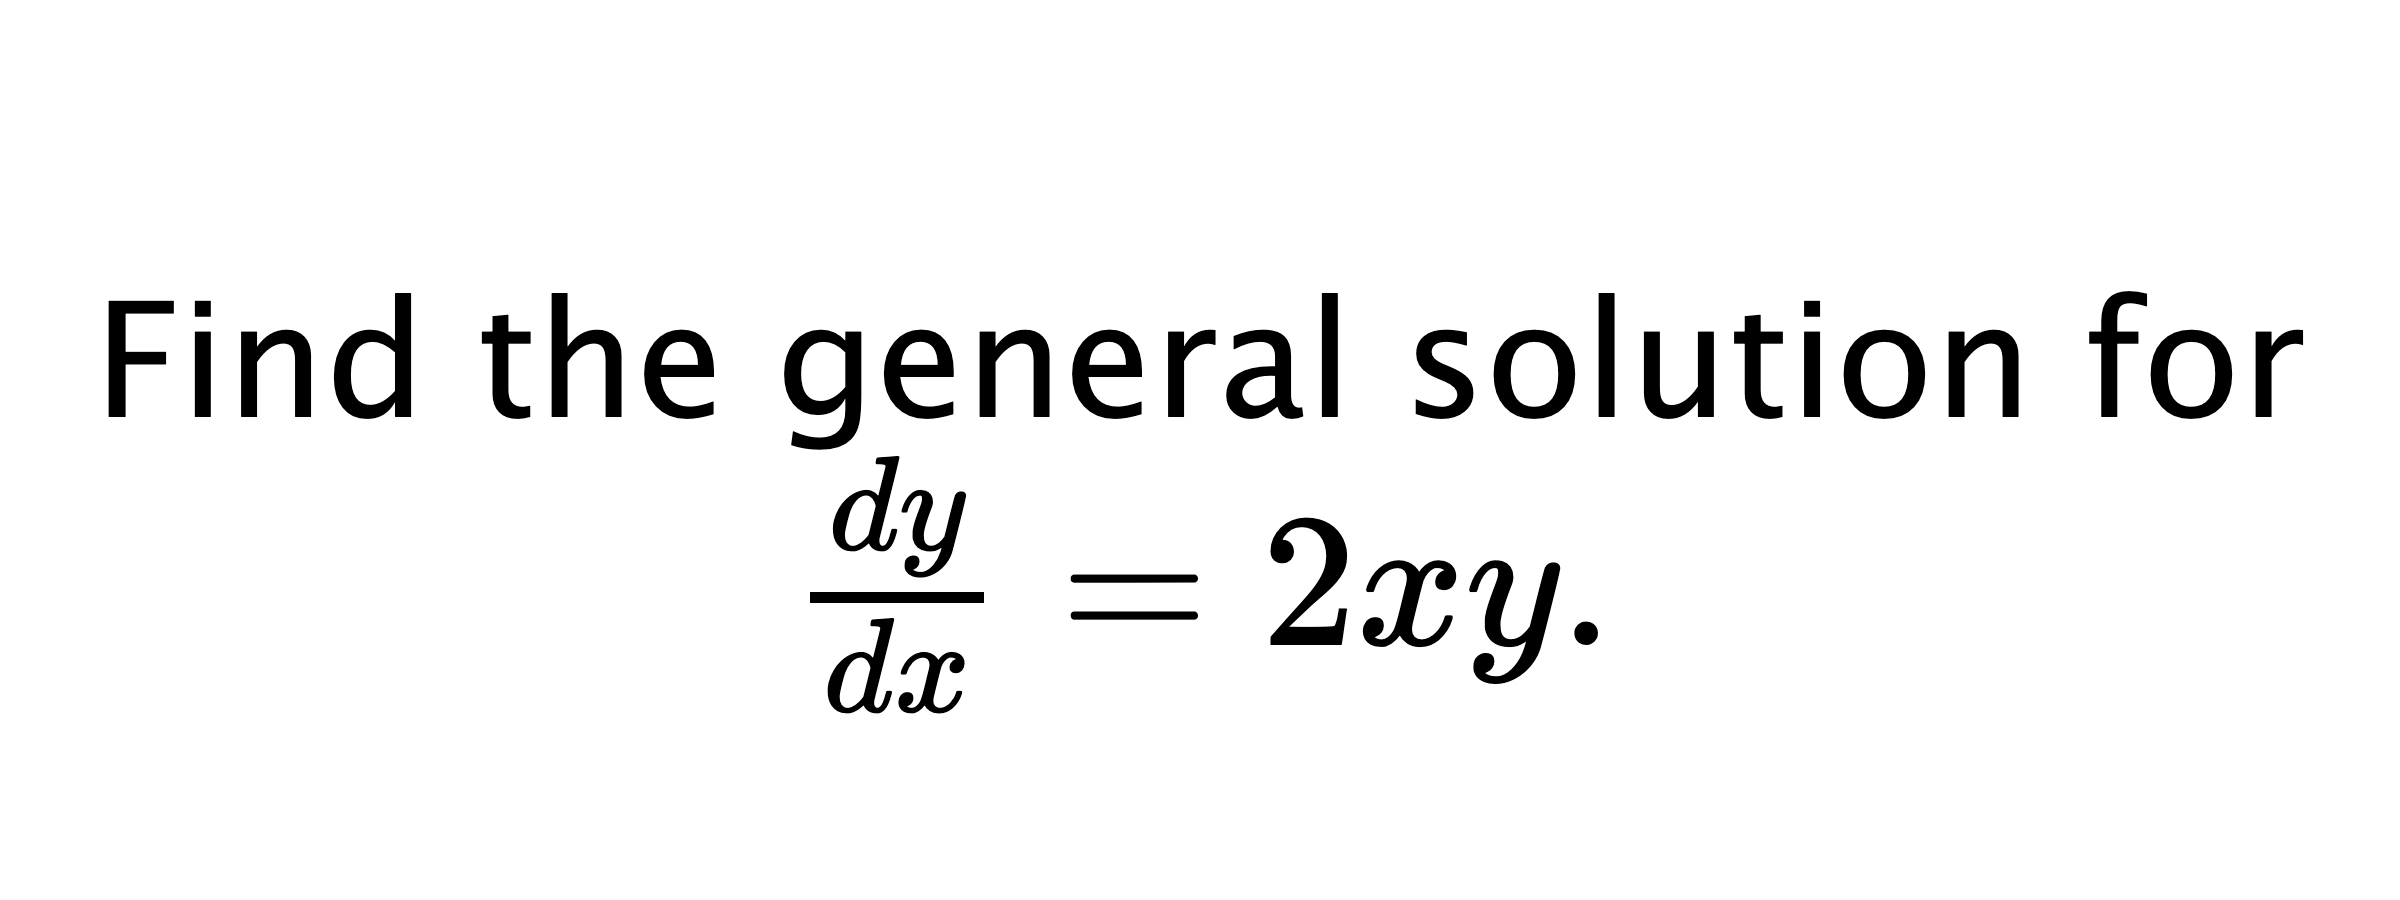  Find the general solution for $ \frac{dy}{dx}=2xy. $